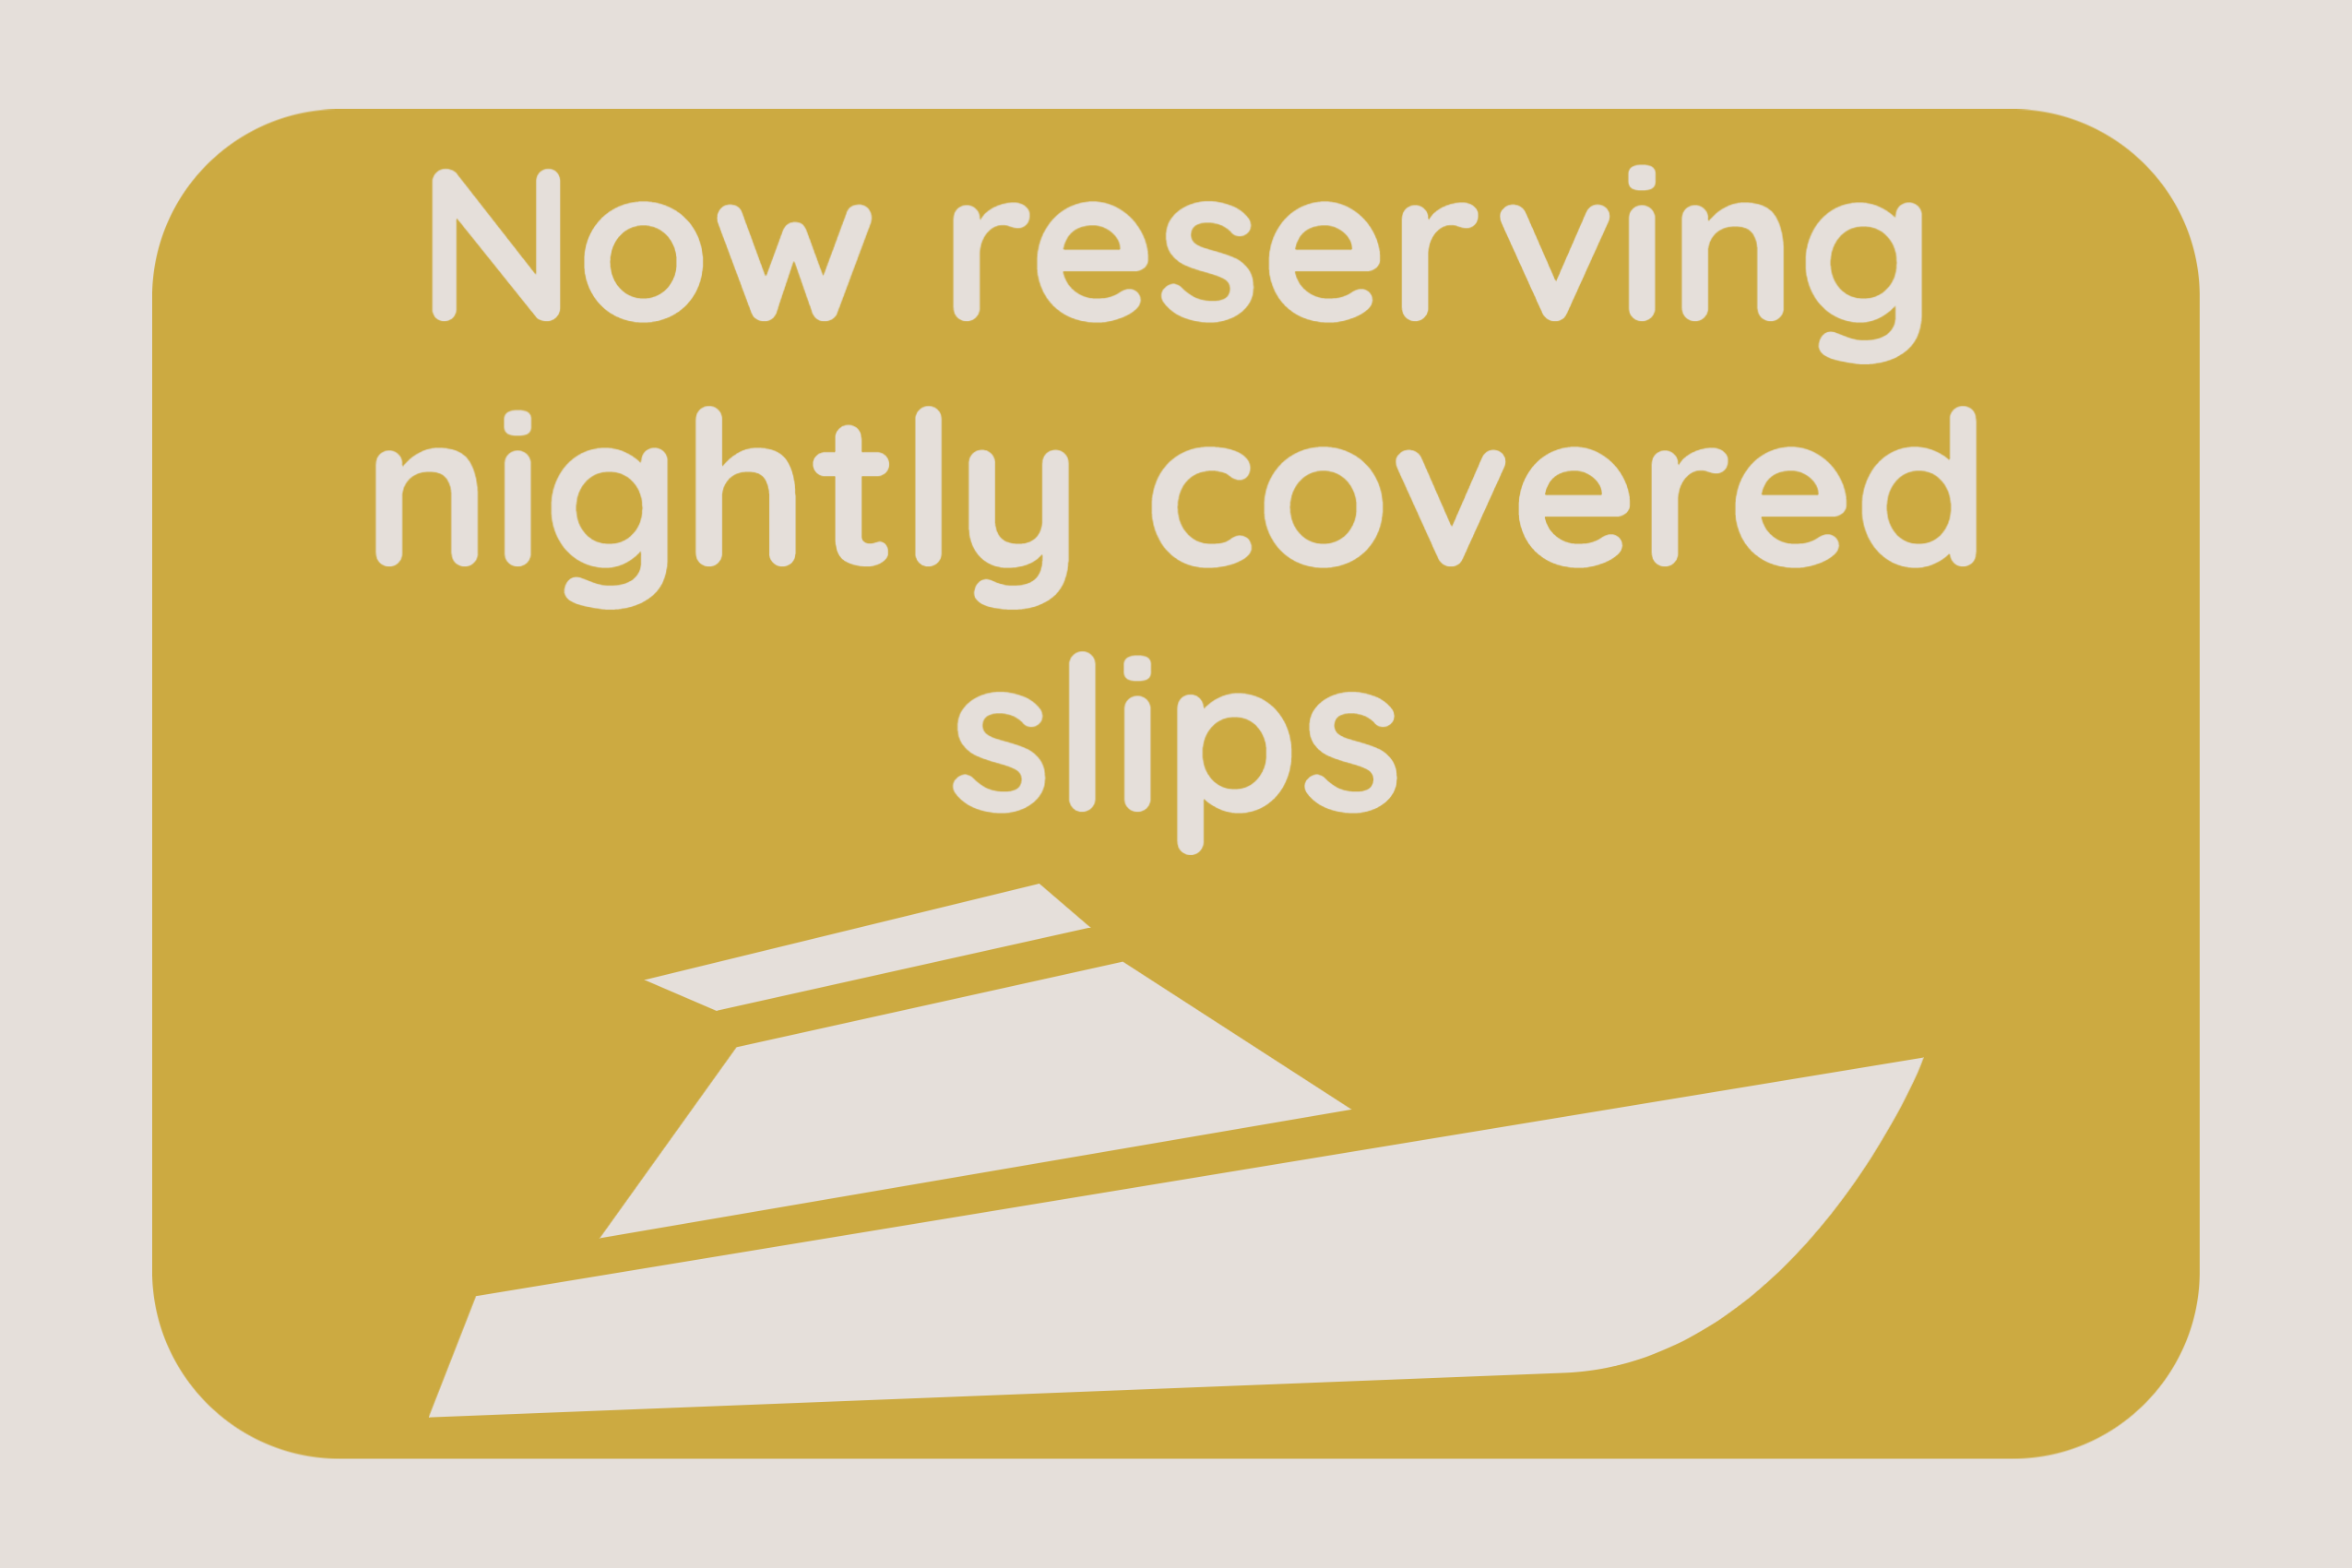 CBR now reserving nightly covered slips